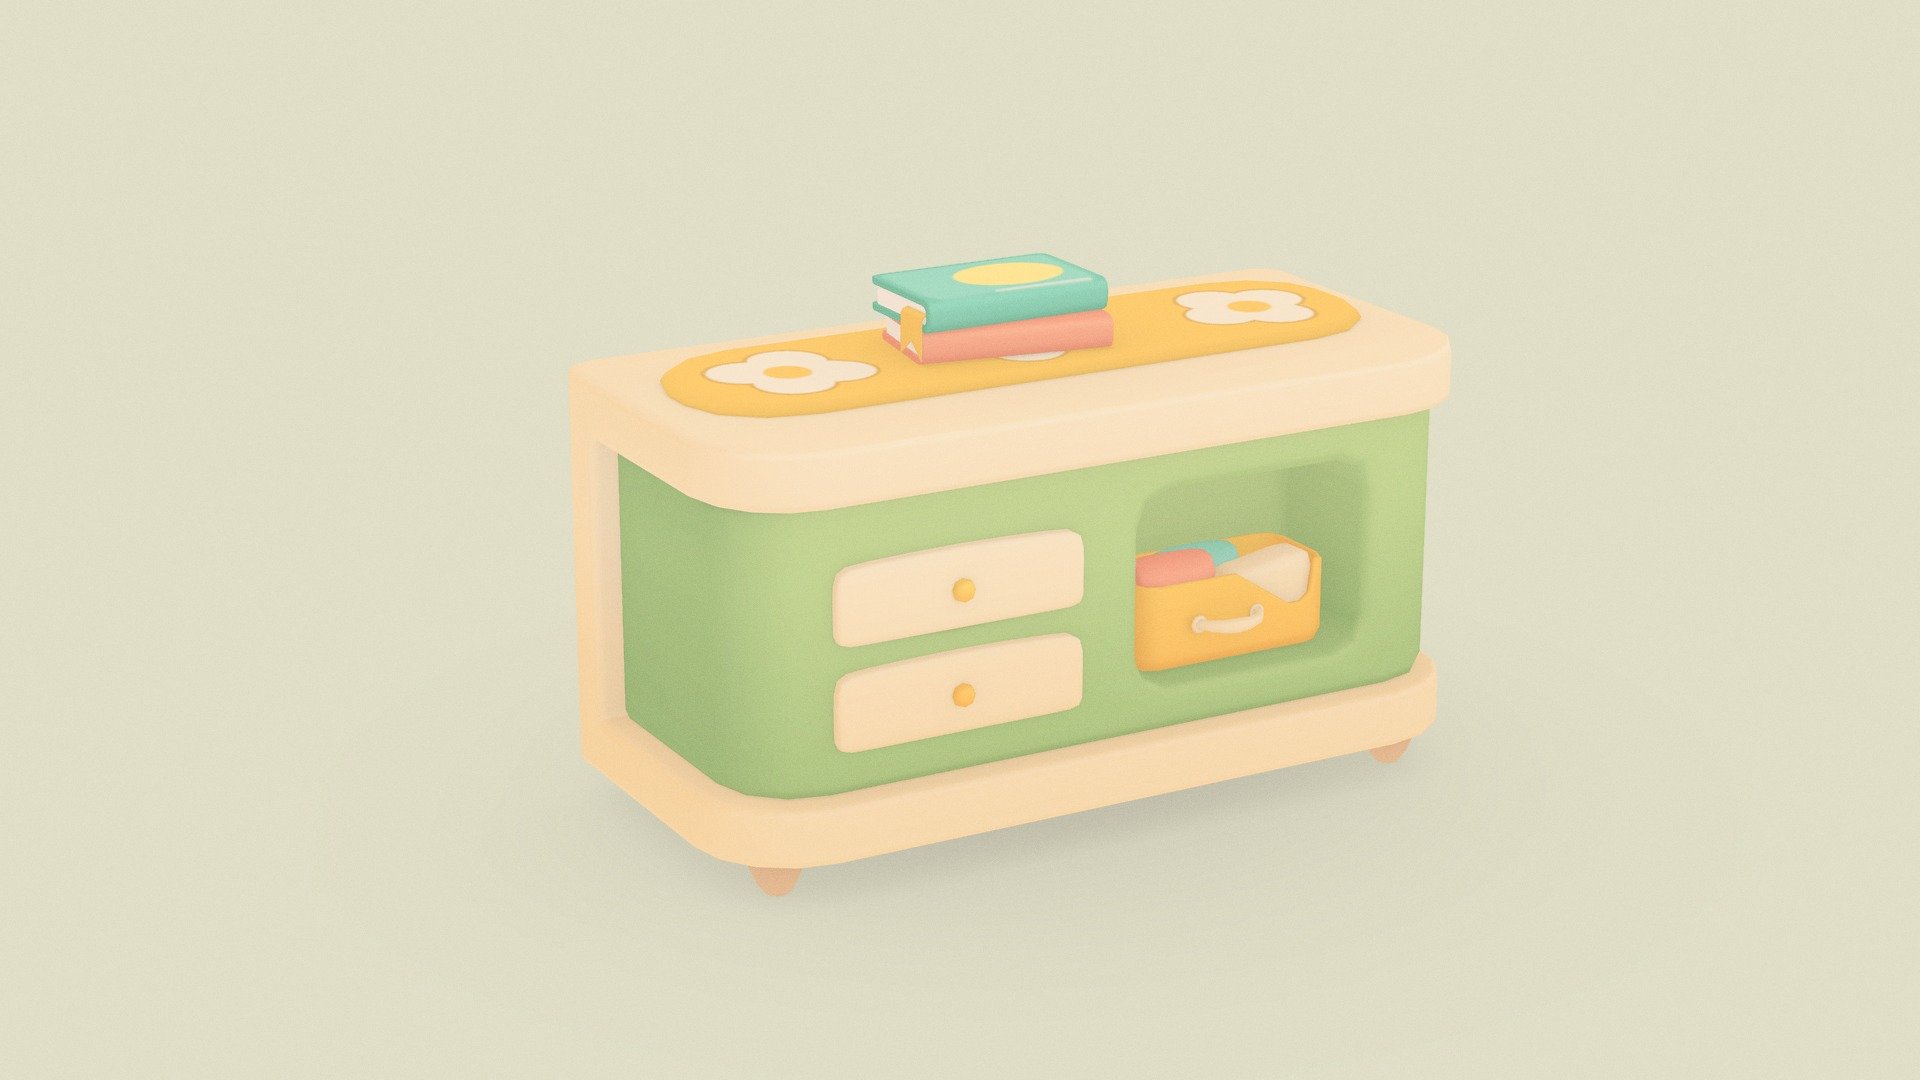 concept art taken from resortopia 

cute drawer made in blender and textured in substance painter, game ready model

texture size 1024* 1024

hope u like it!

i’m working on more props for this theme! - Cute stylized drawer - low poly - game ready - Download Free 3D model by Pricey (@siddharthkuthal) 3d model